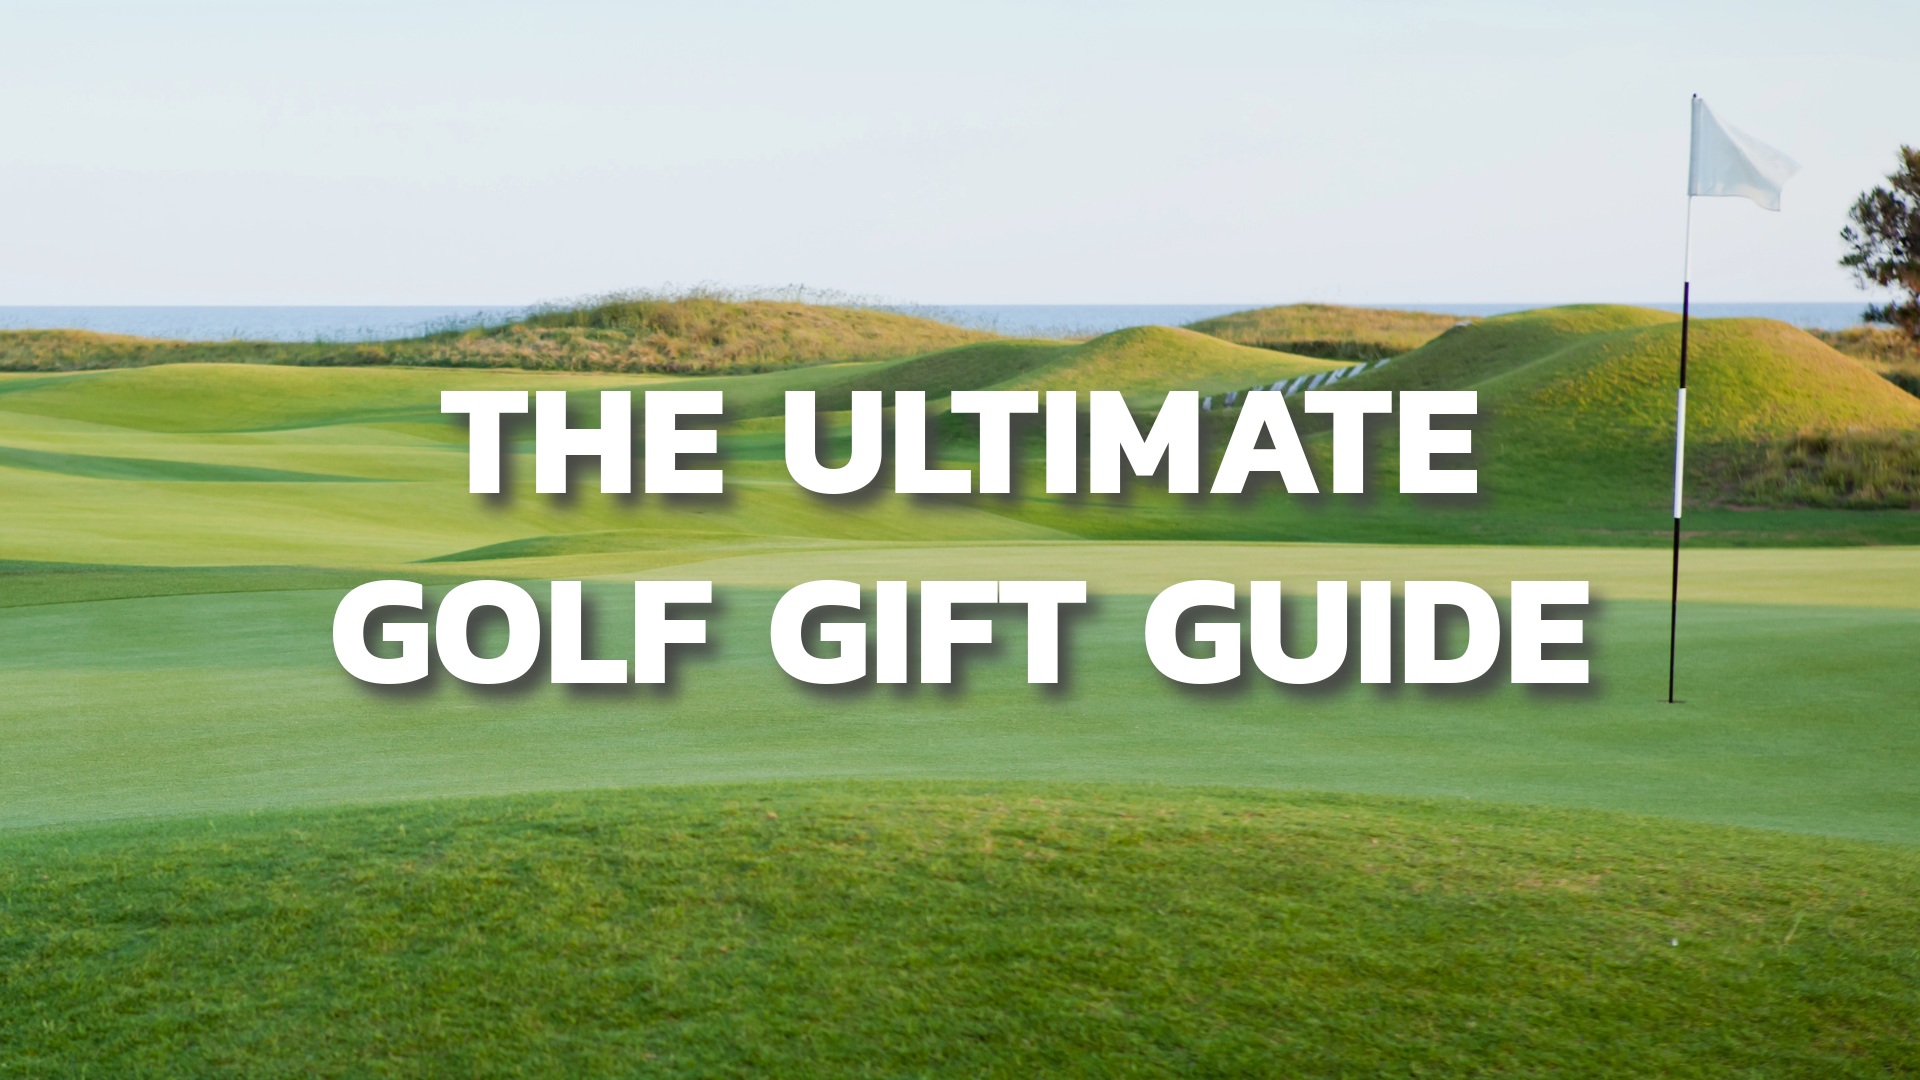 The Ultimate Golf Gift Guide